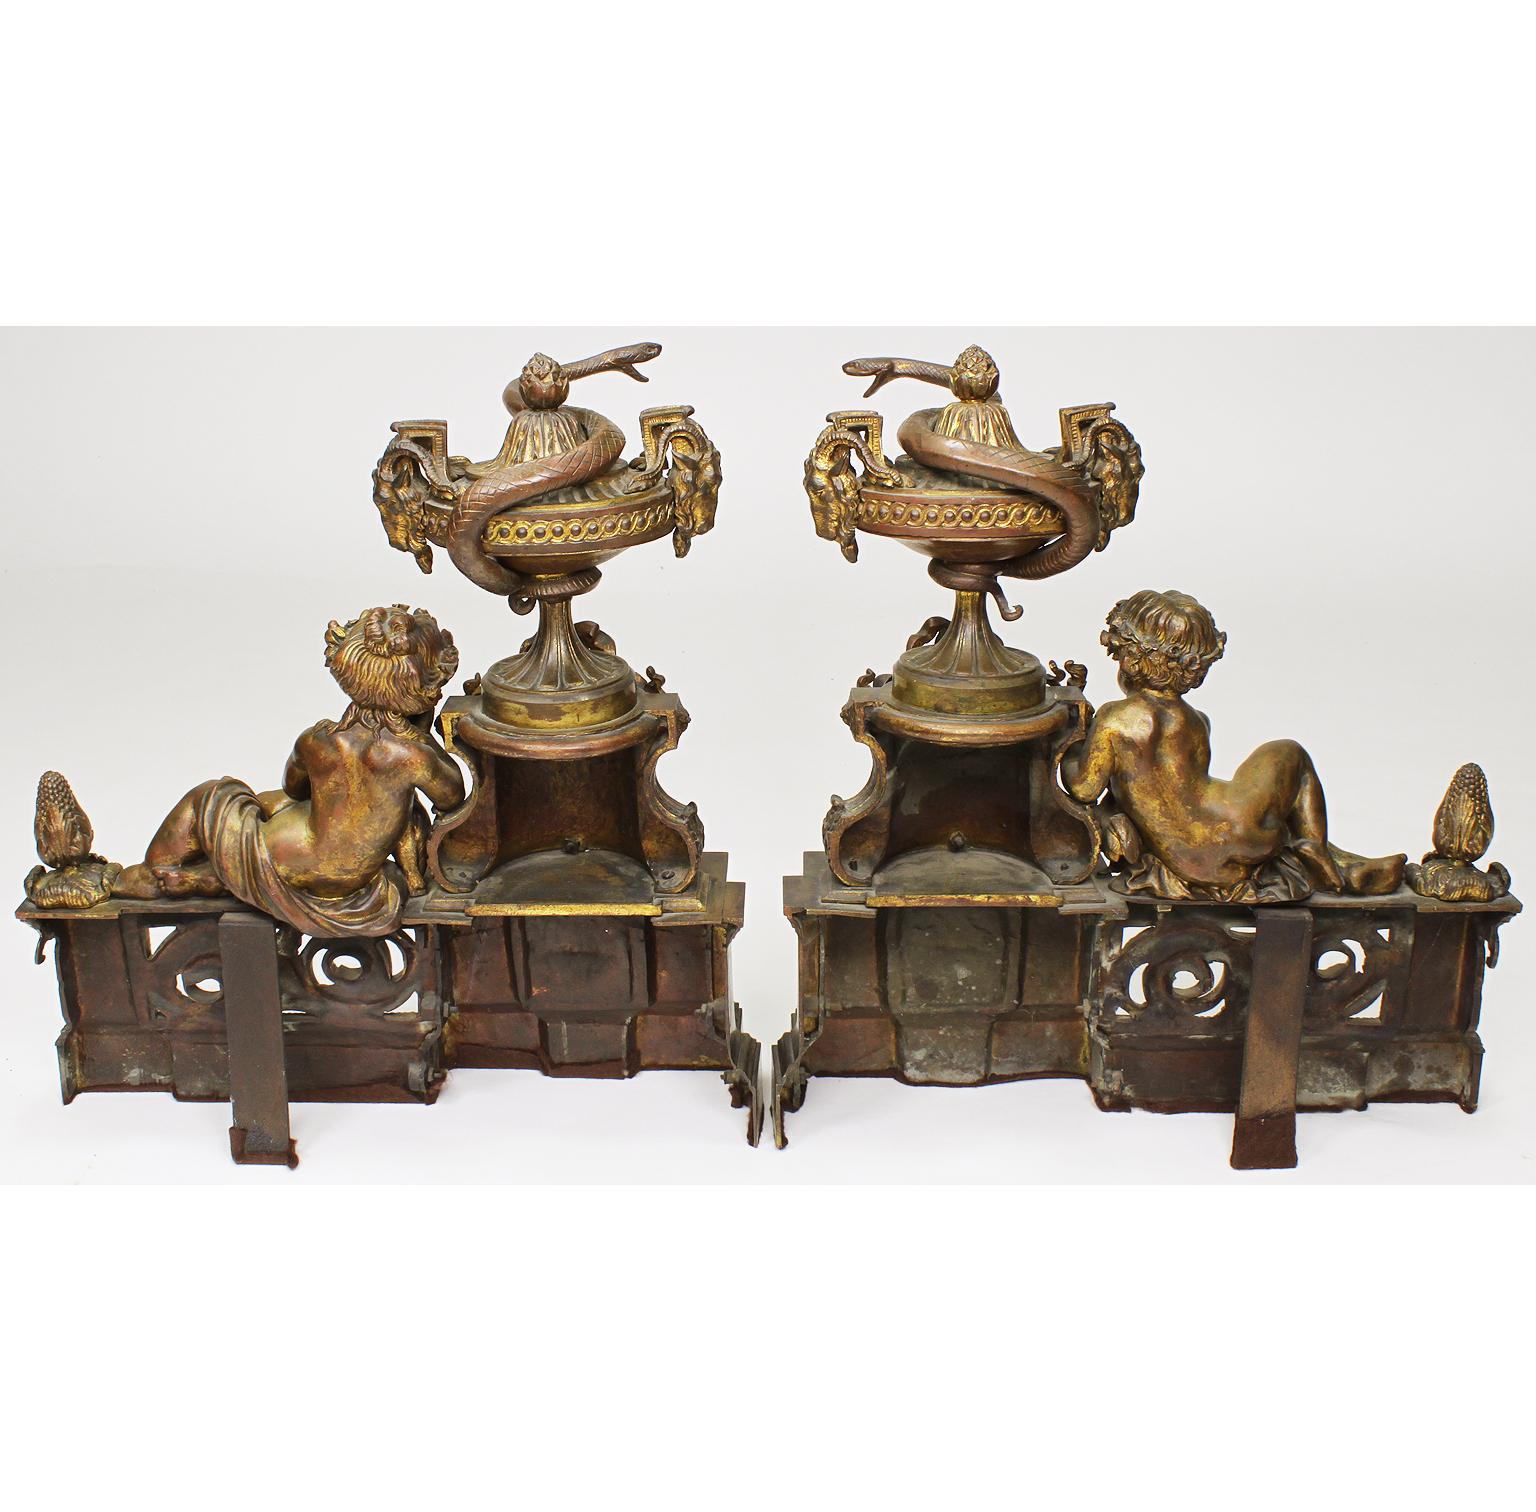 French 19th Century Louis XV Style Gilt-Bronze Chenets Andirons with Putti, Pair For Sale 5